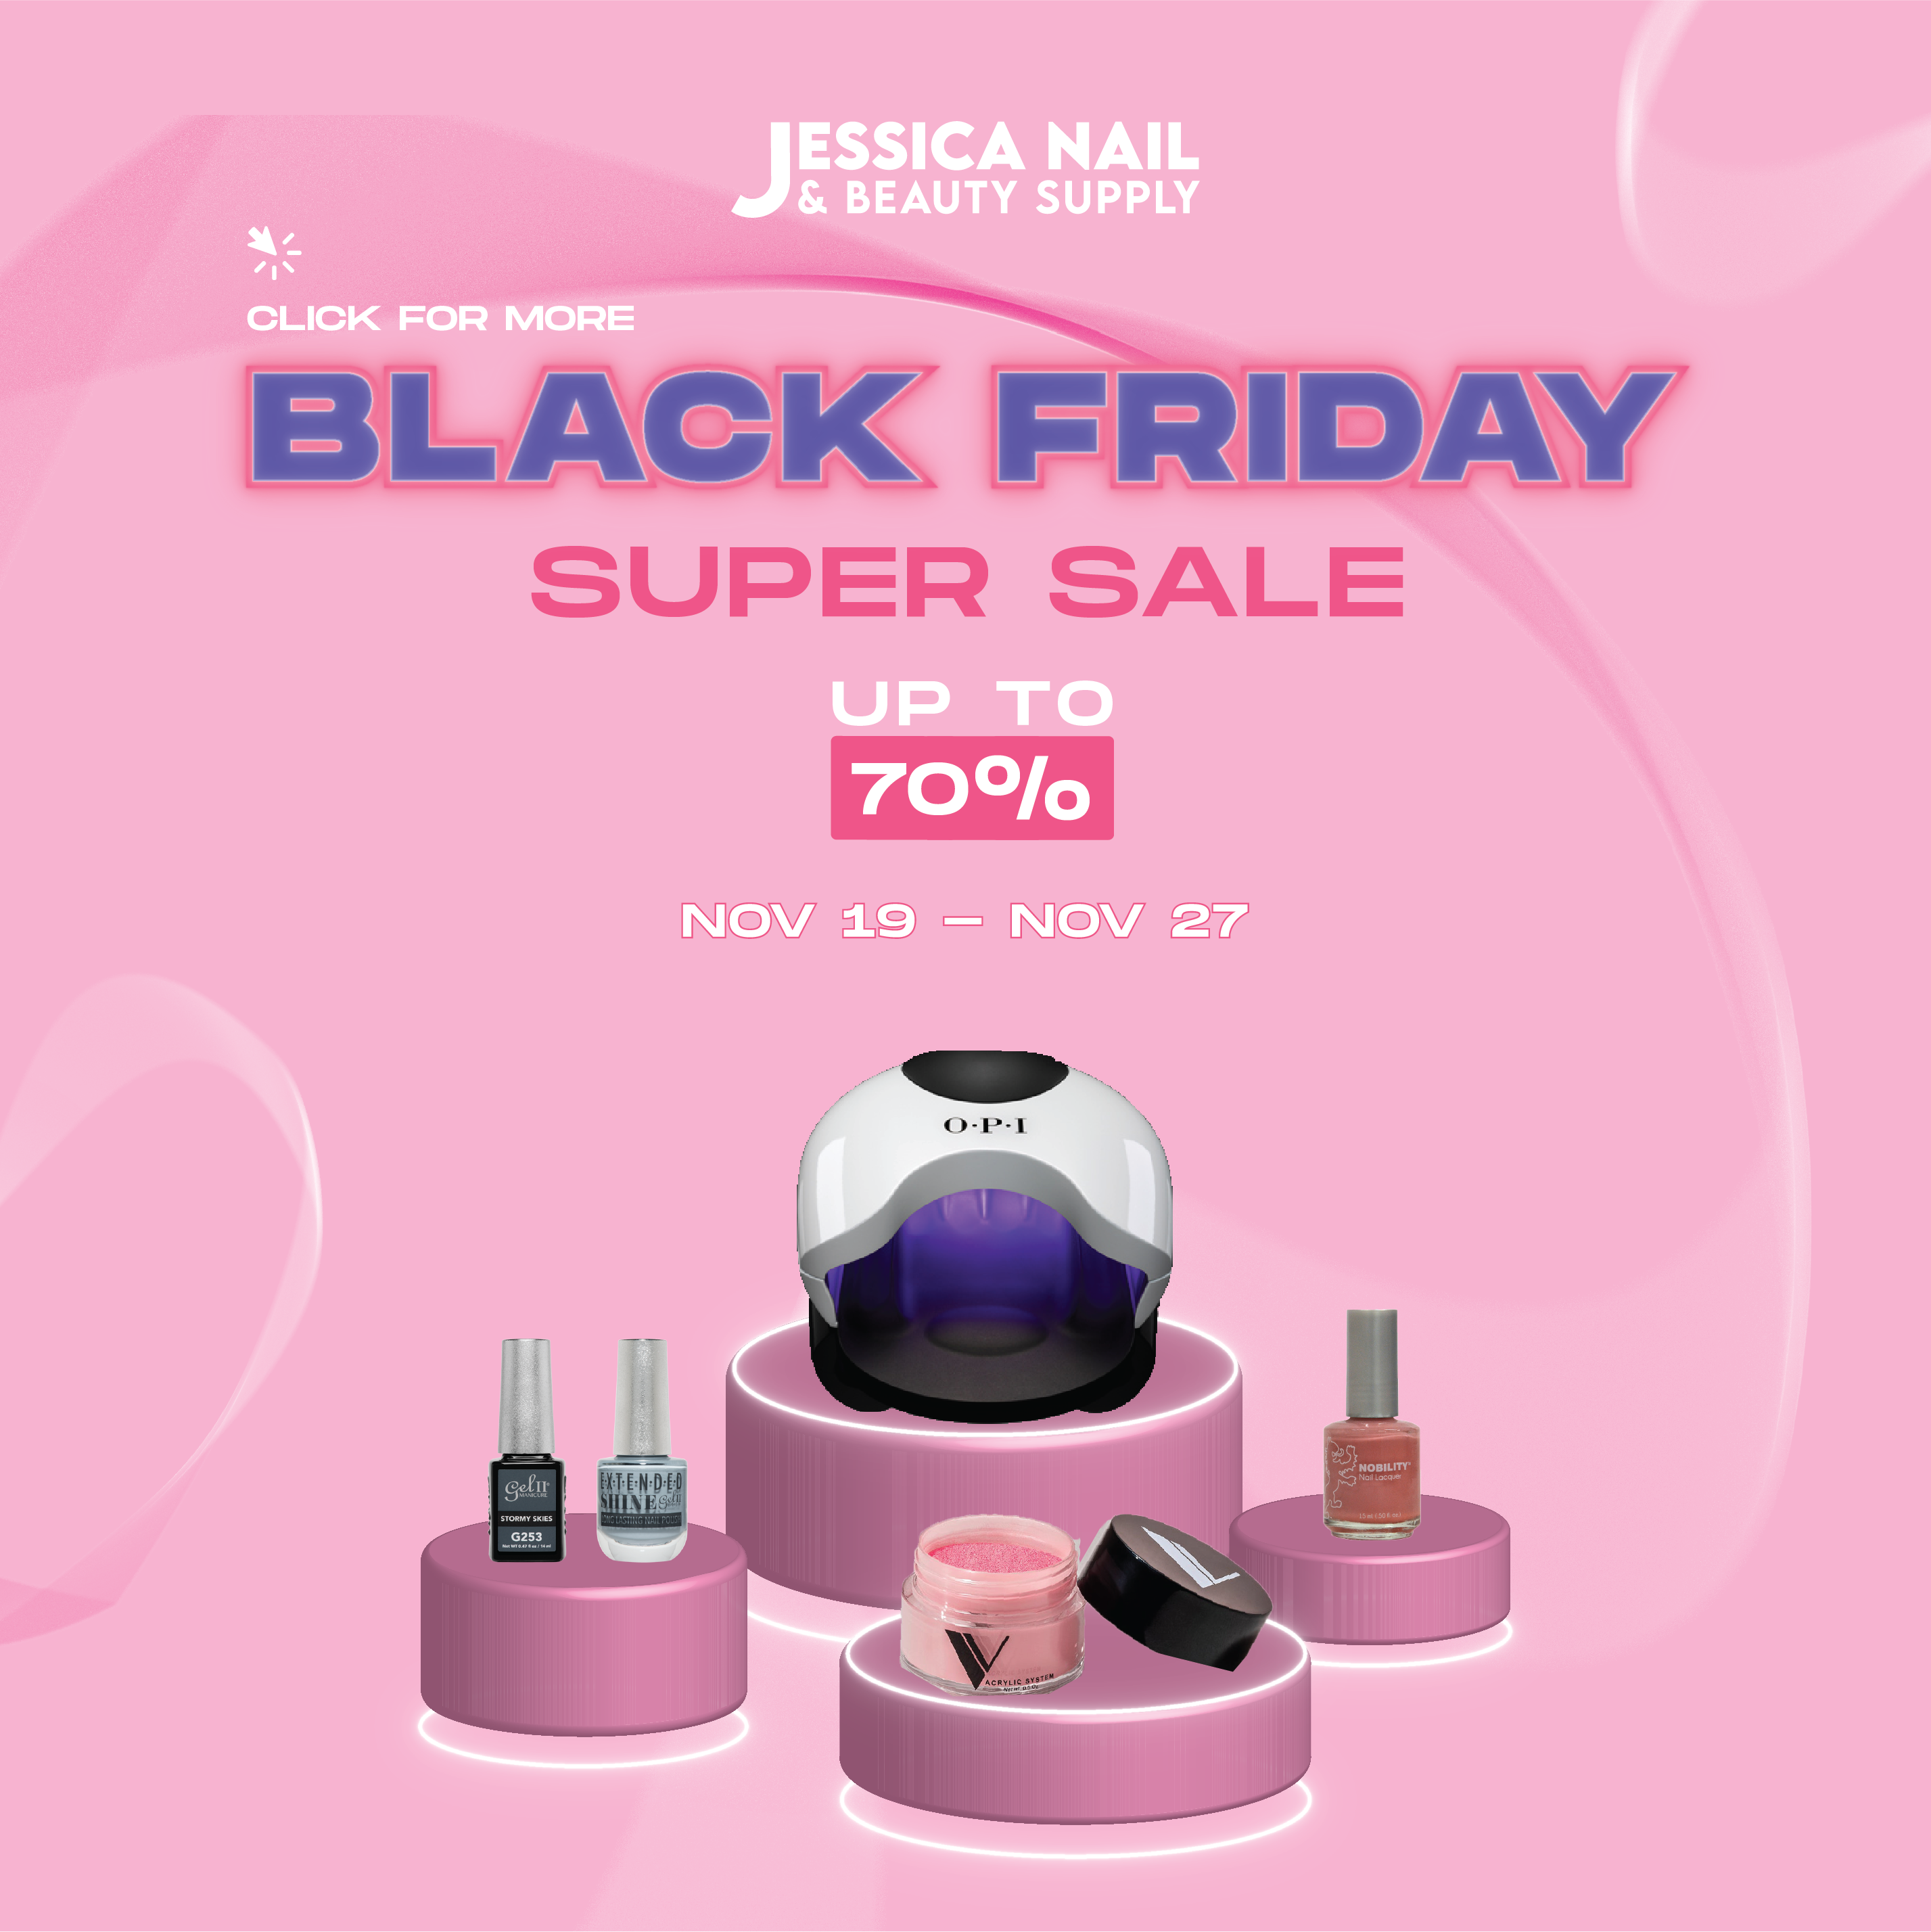 Sweetie Nail Supply's Product Recommendations for Black Friday